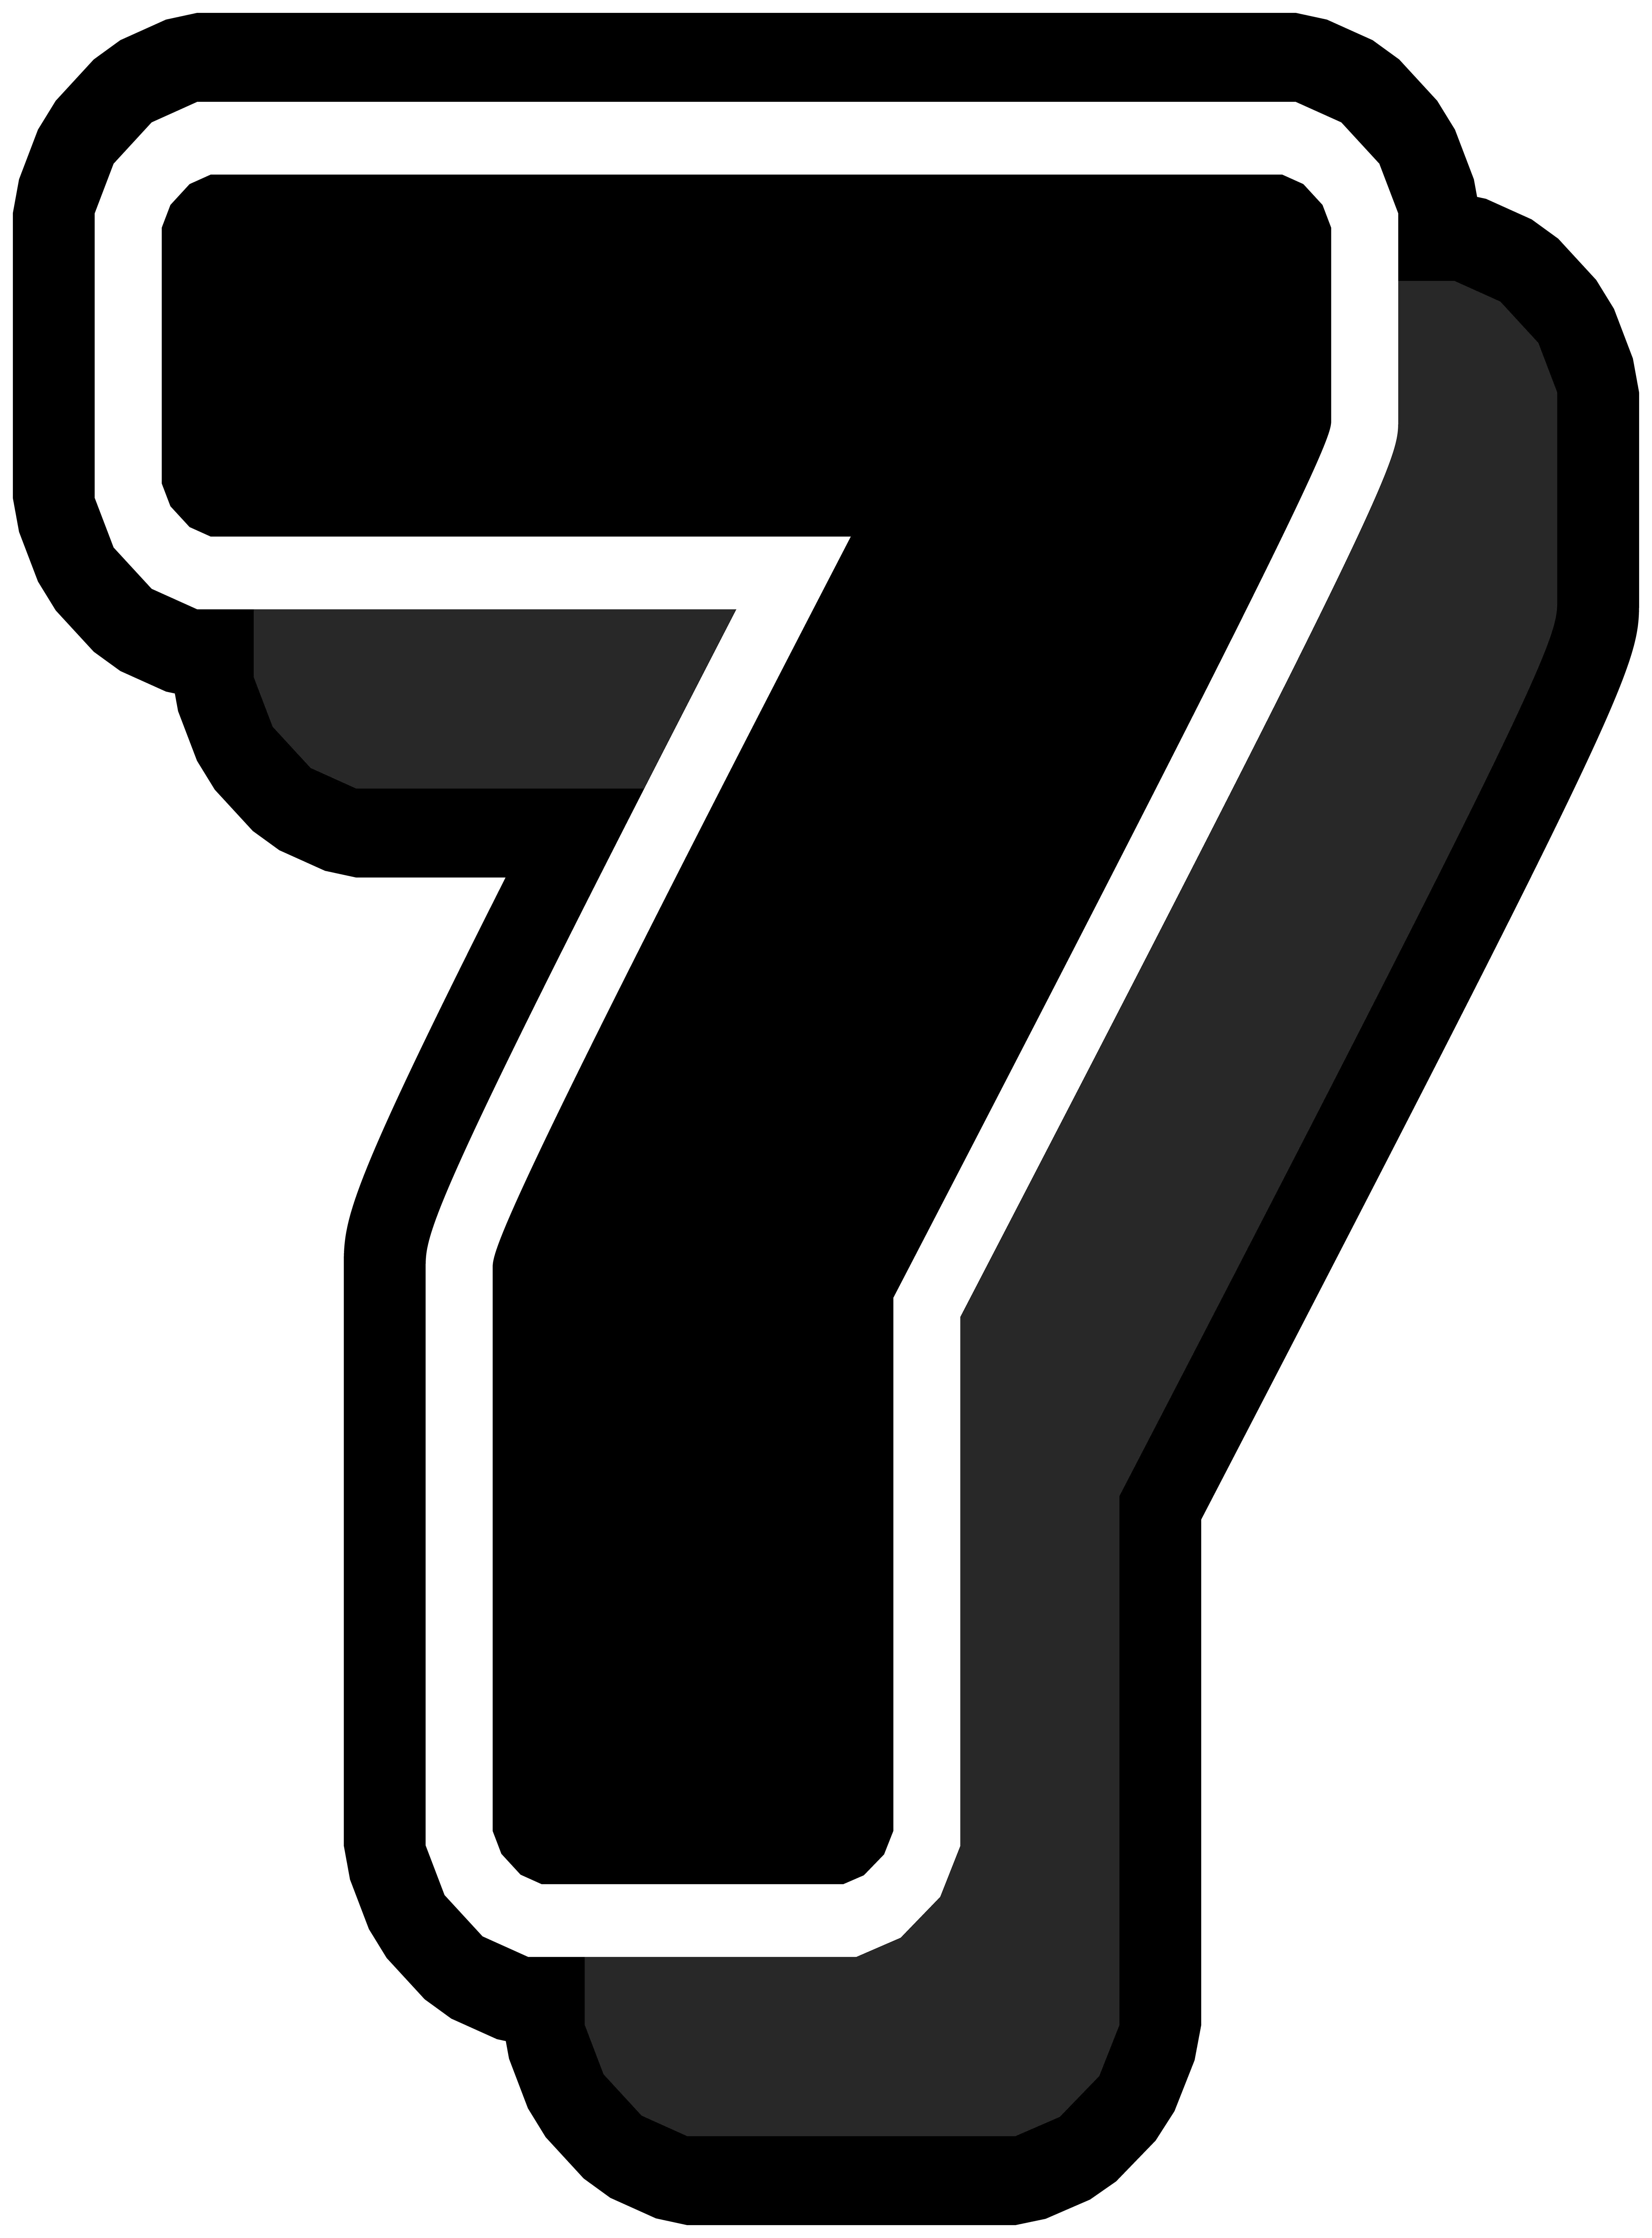 Seven Black Number PNG Clipart​-Quality Free Image and Transparent PNG Clipart